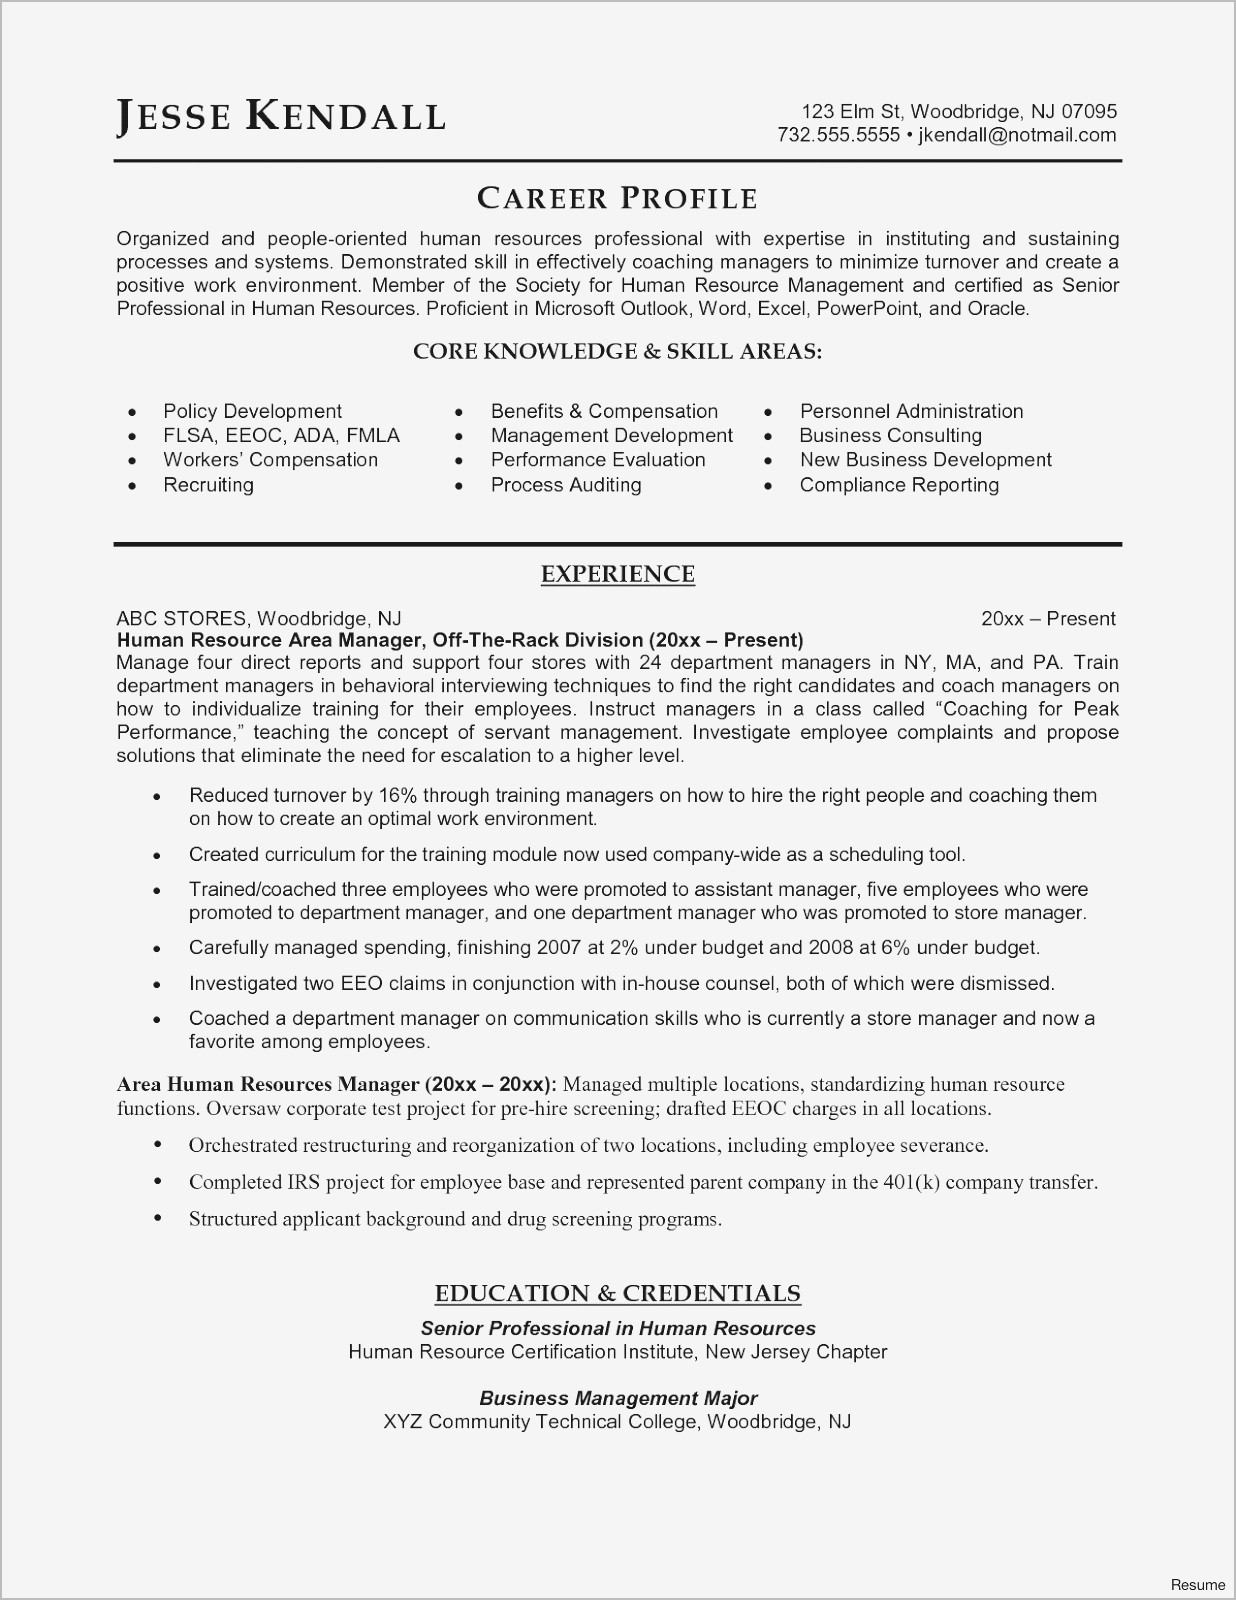 severance letter template example-Resume Cover Letter Templates Awesome Resume Template Microsoft Word Professional Job Resume Template Od 9-e